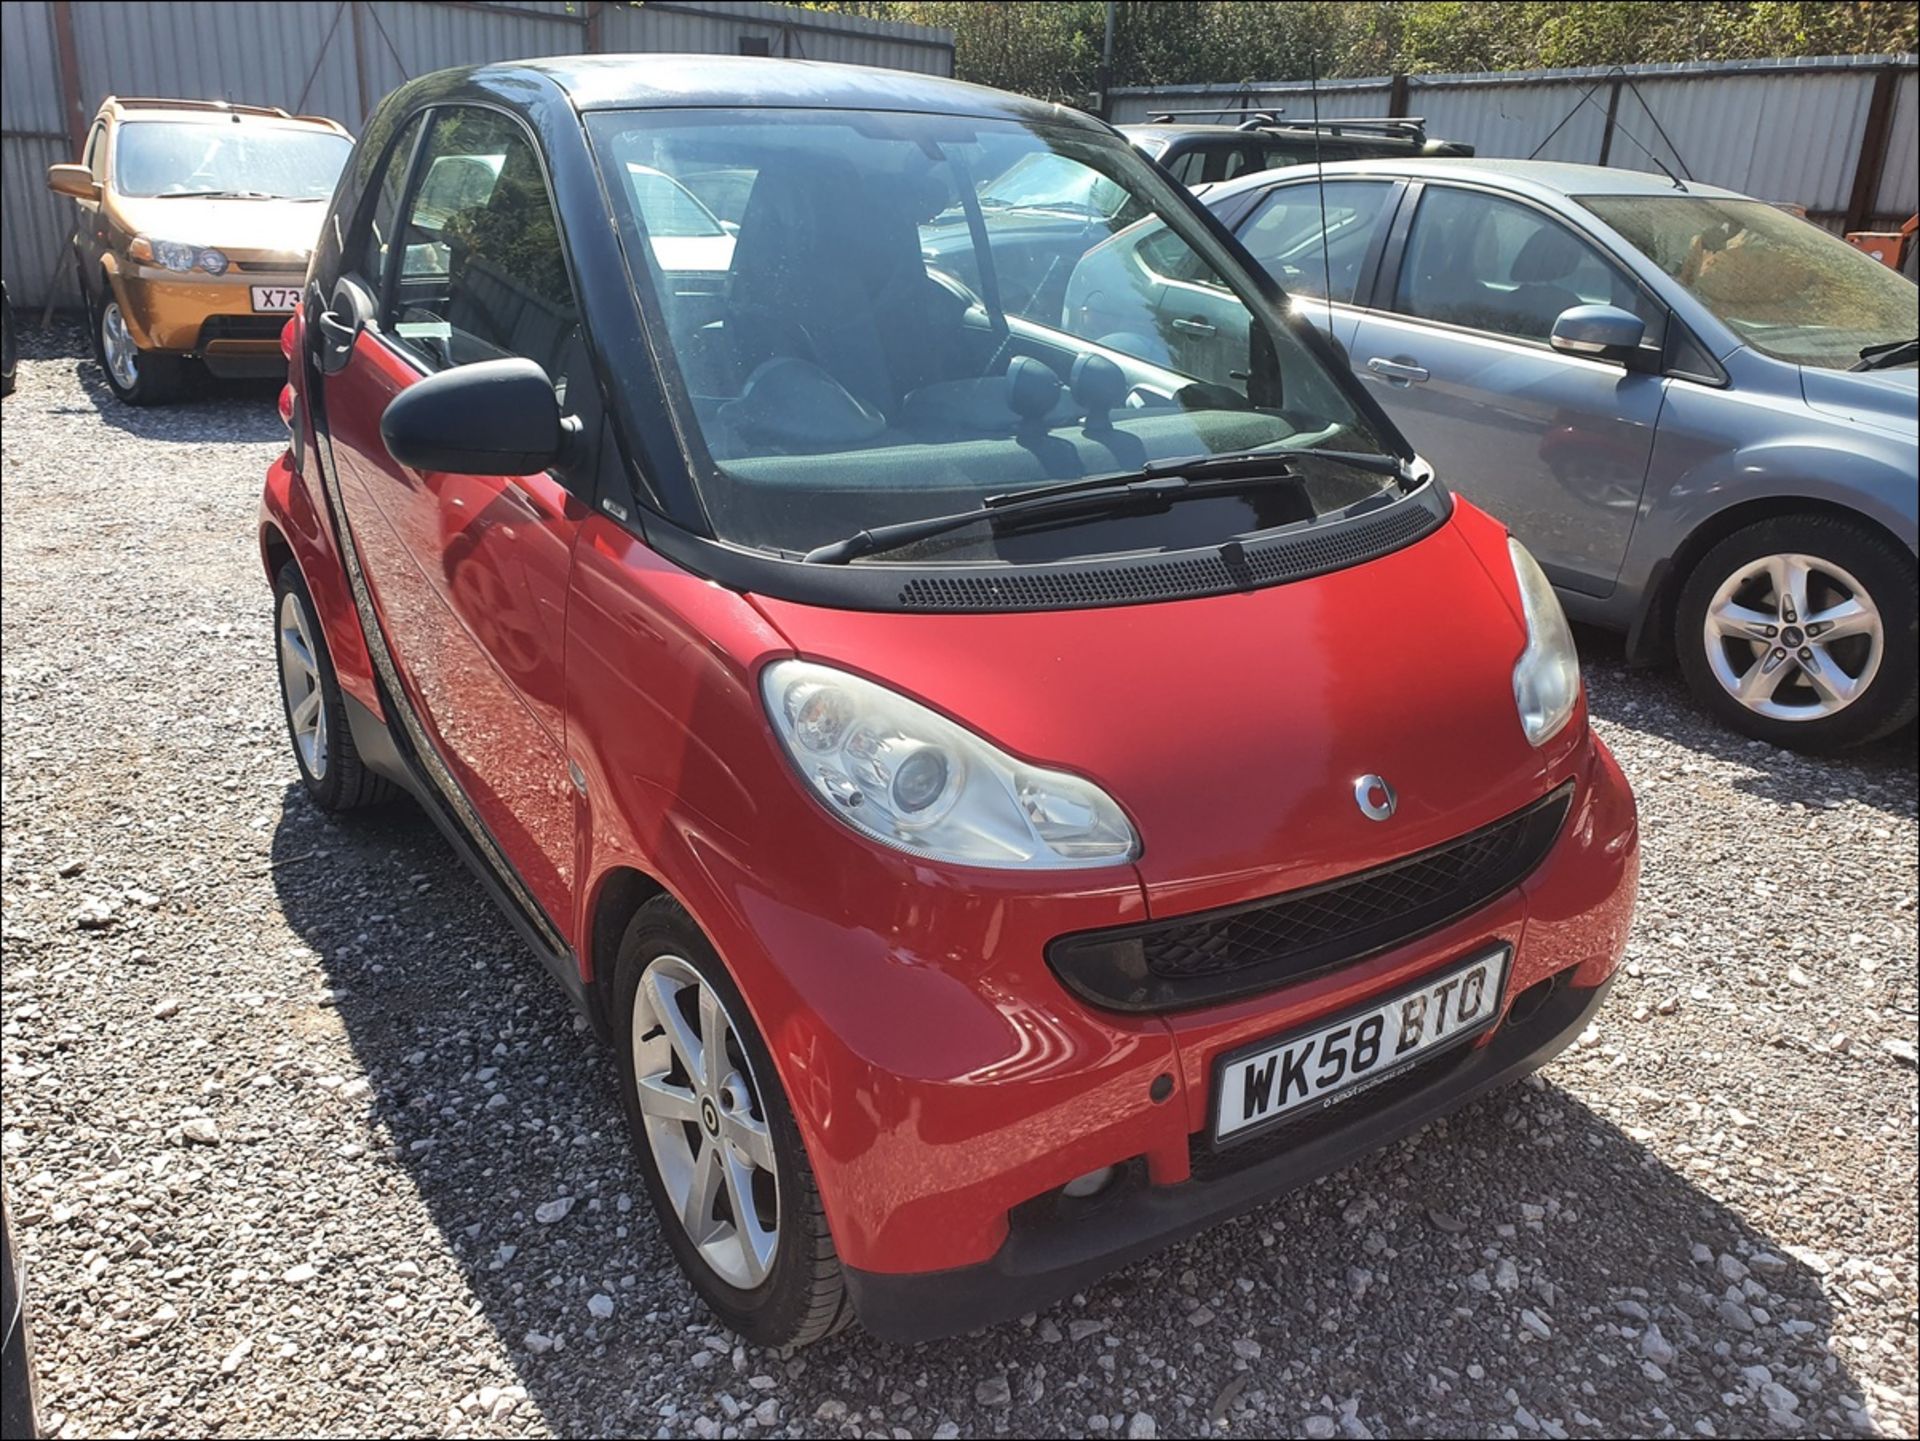 08/58 SMART FORTWO PULSE MHD AUTO - 999cc 2dr Coupe (Red/black, 41k) - Image 4 of 9